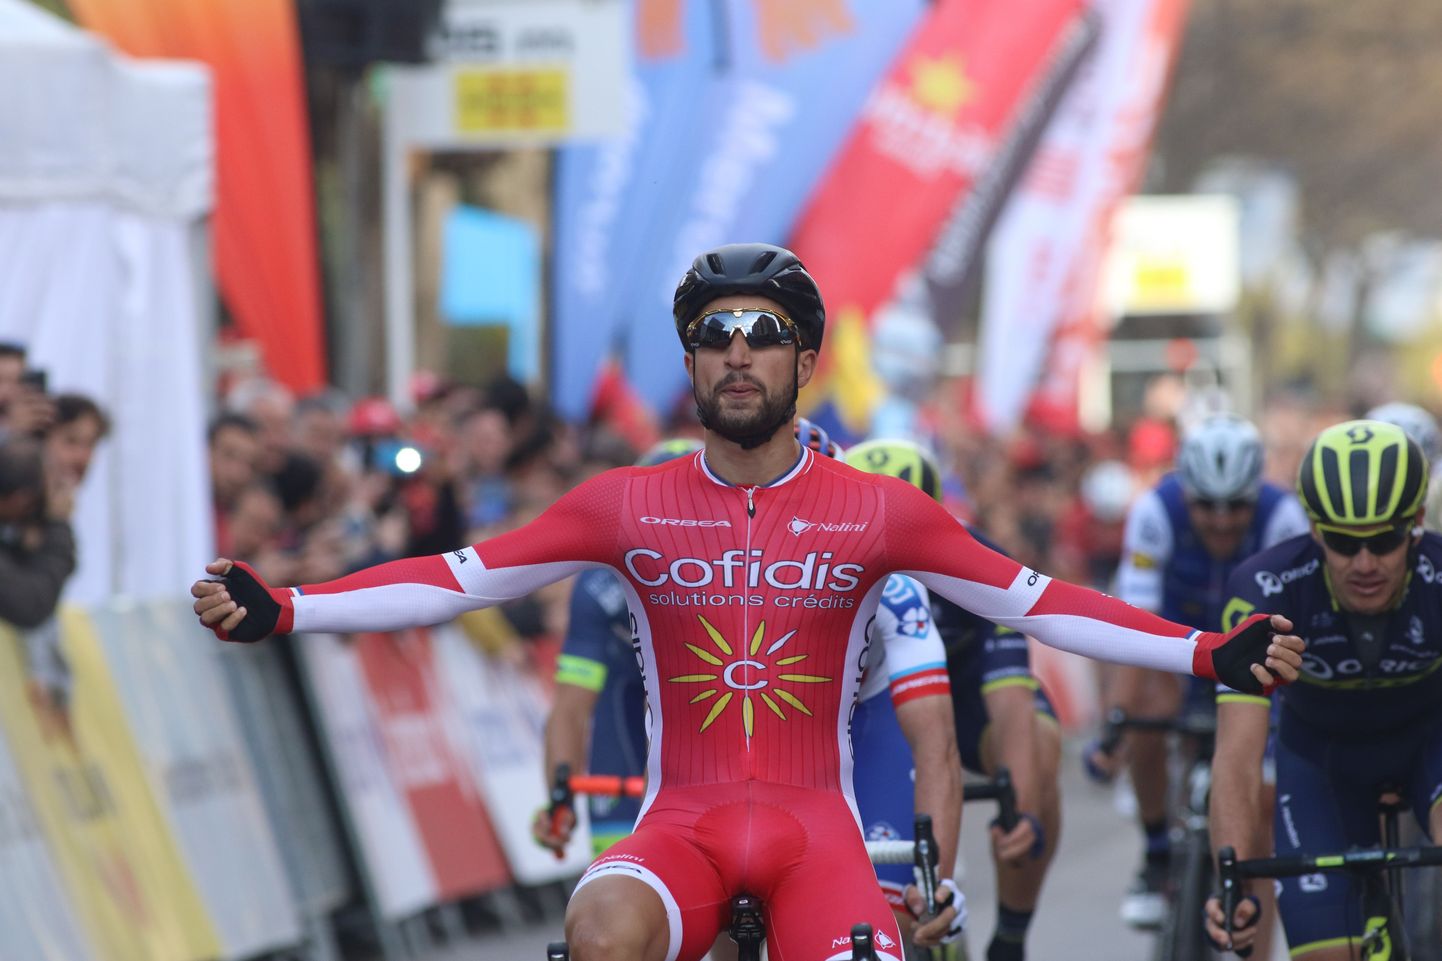 Nacer Bouhanni racing over the finish line to win the Volta Ciclista a Catalunya 2017 -